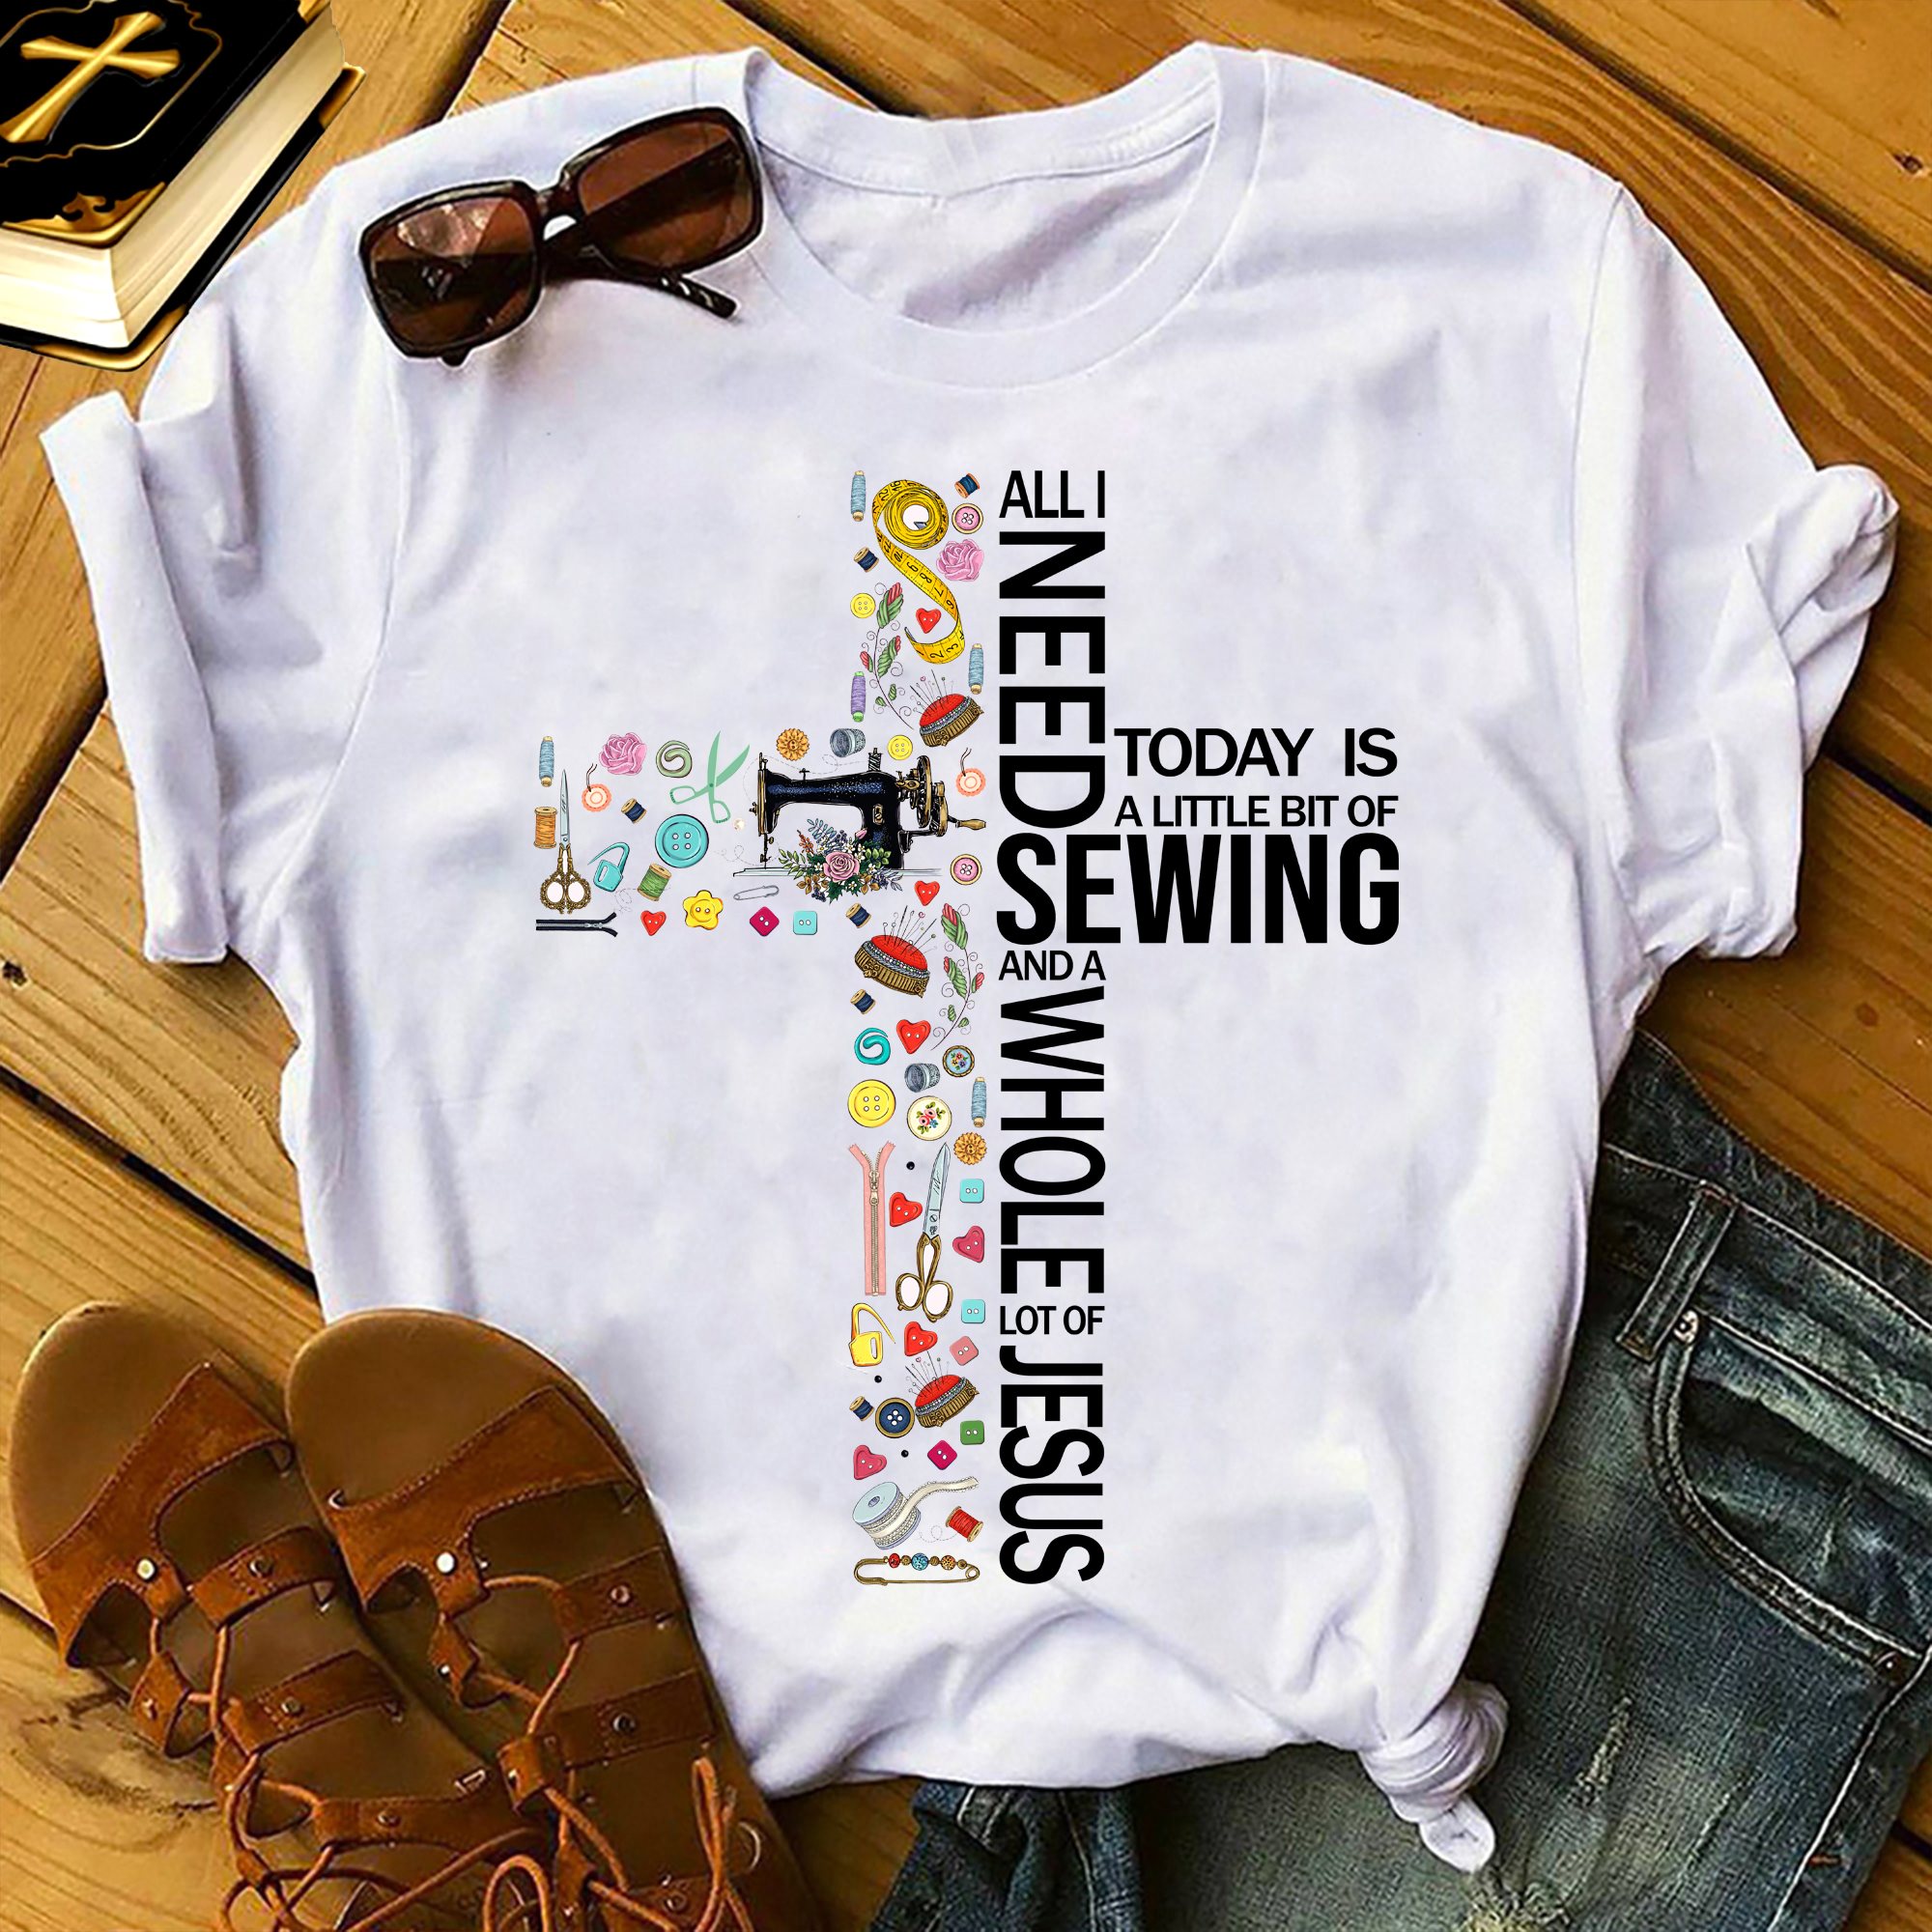 All I need today is a little bit of sewing